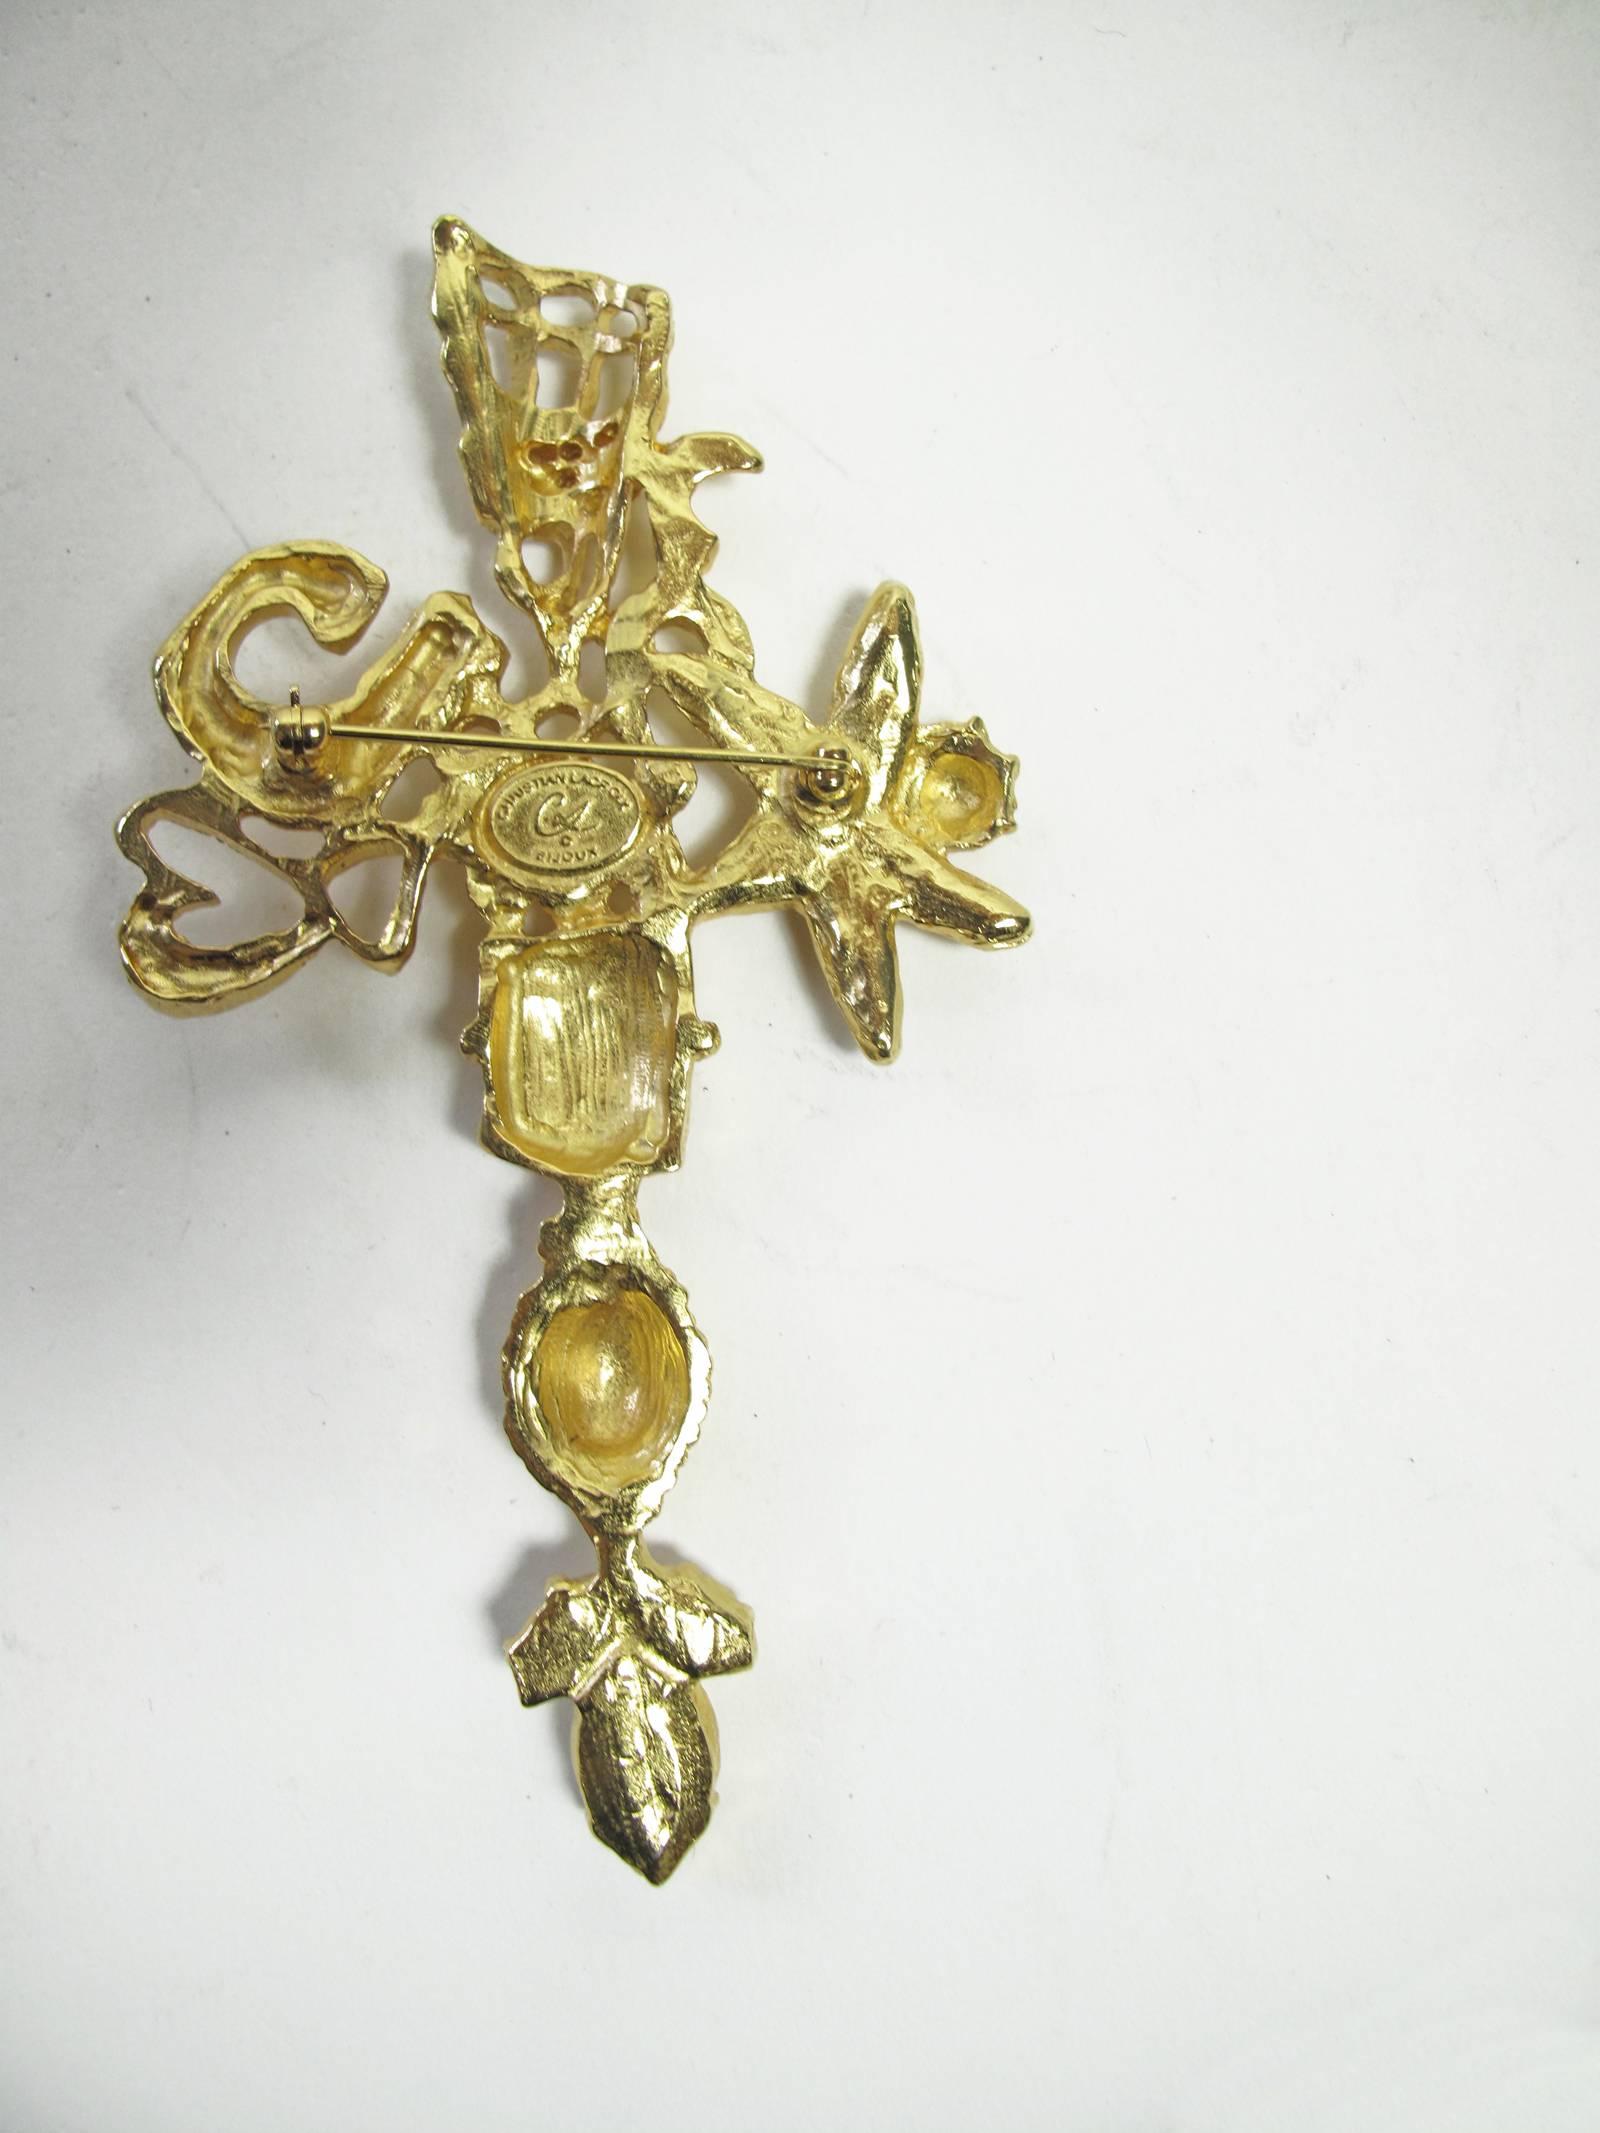 Christian Lacroix large gold tone cross pin with rhinestones.  Condition: Excellent.  4 1/4" L x 2 1/4" W 